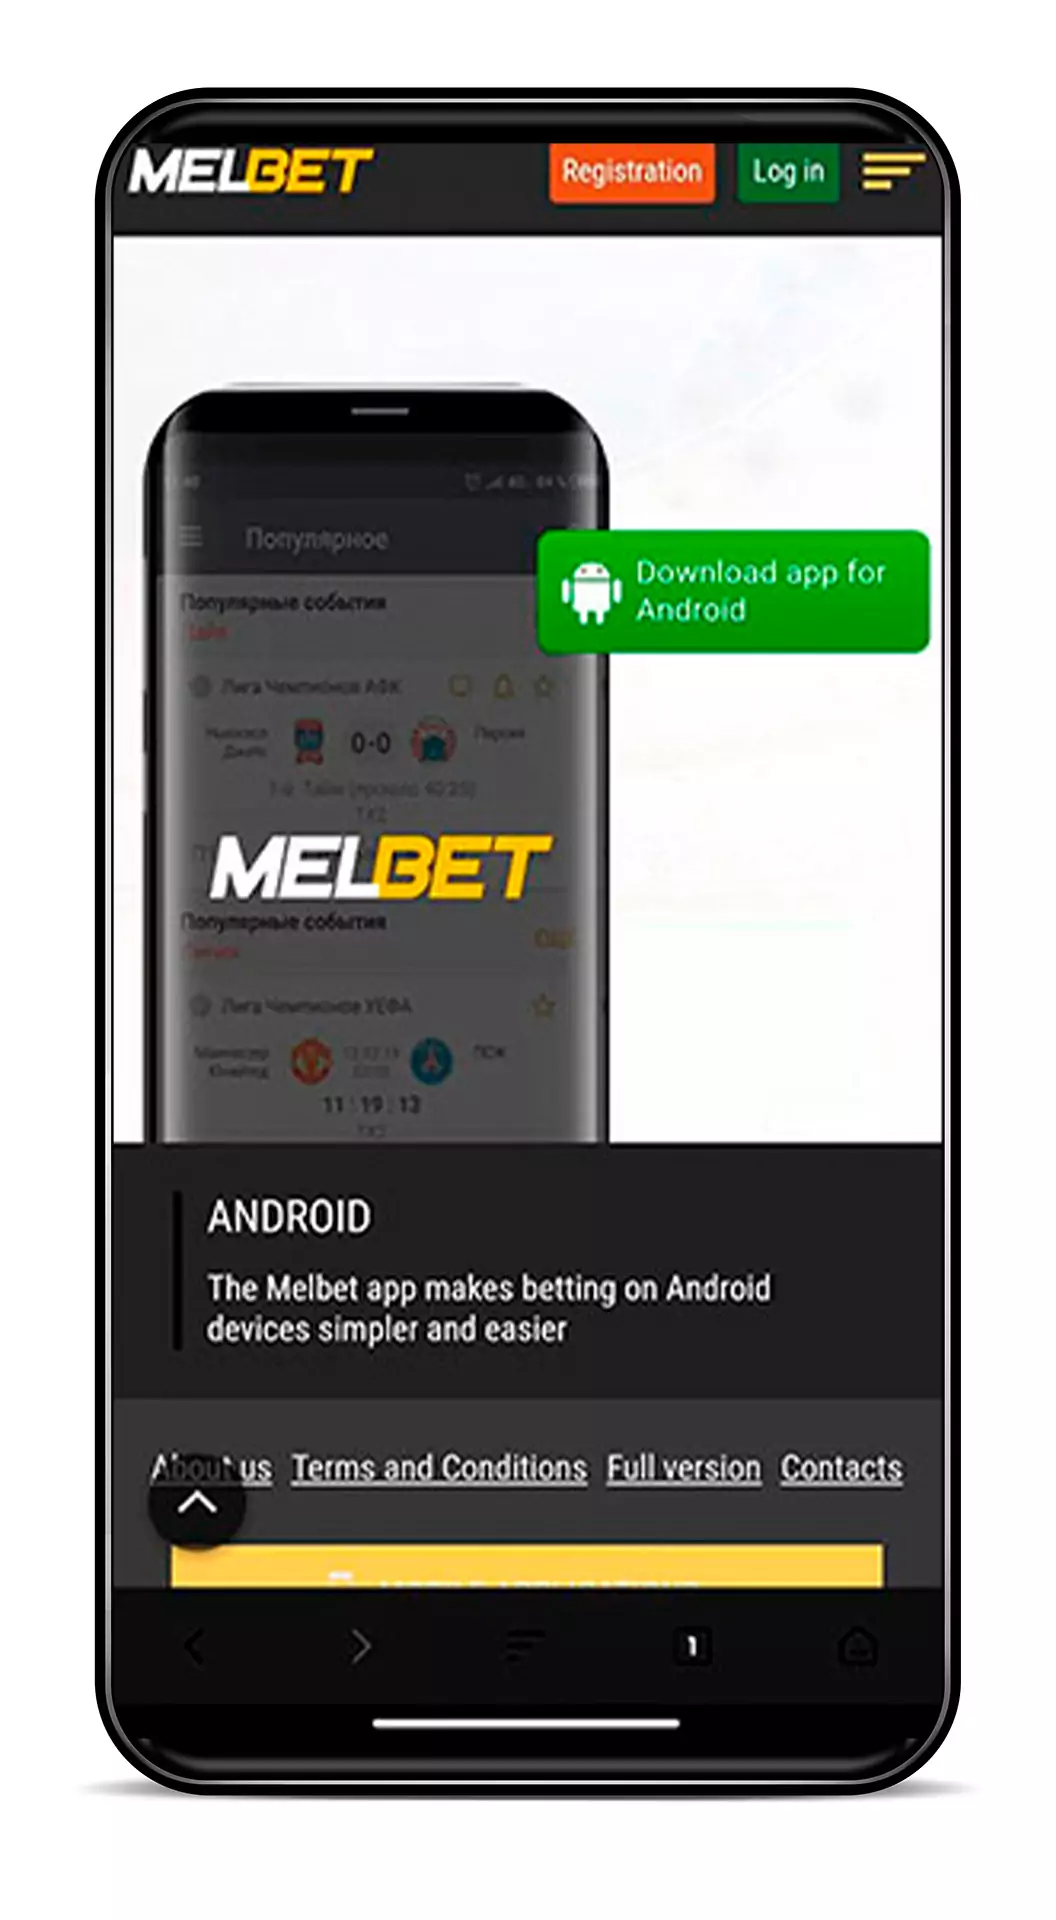 Afetr downloading you will be able to install the Melbet app.